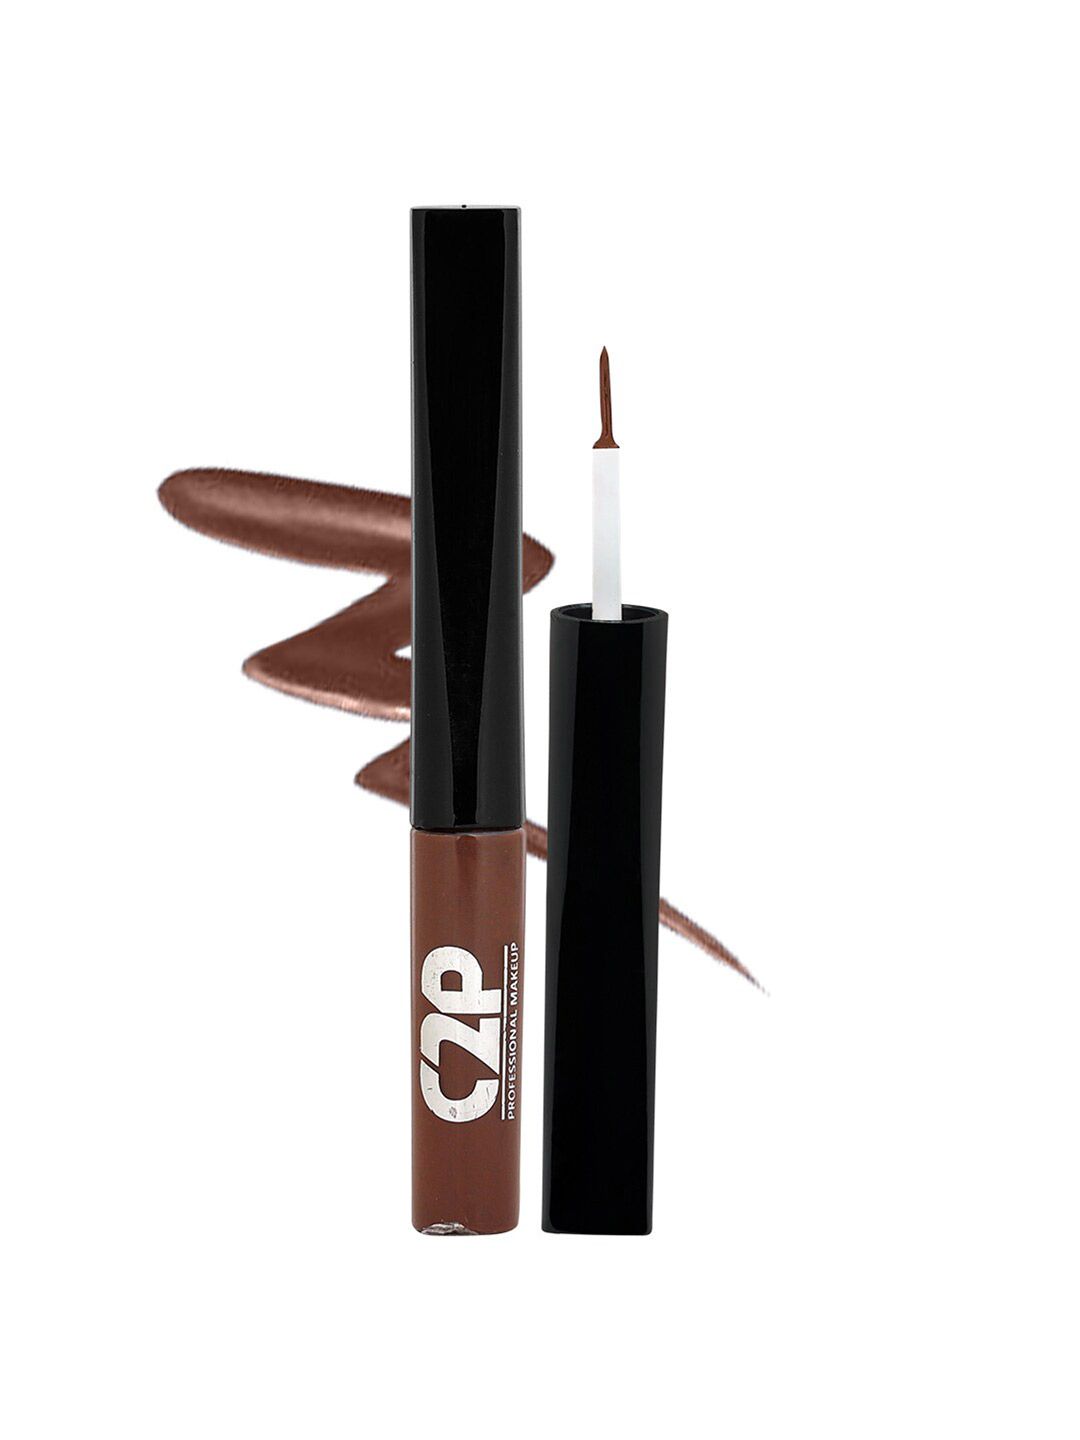 C2P PROFESSIONAL MAKEUP Playmate Matte Eyeliner - Baked Brown 04 Price in India